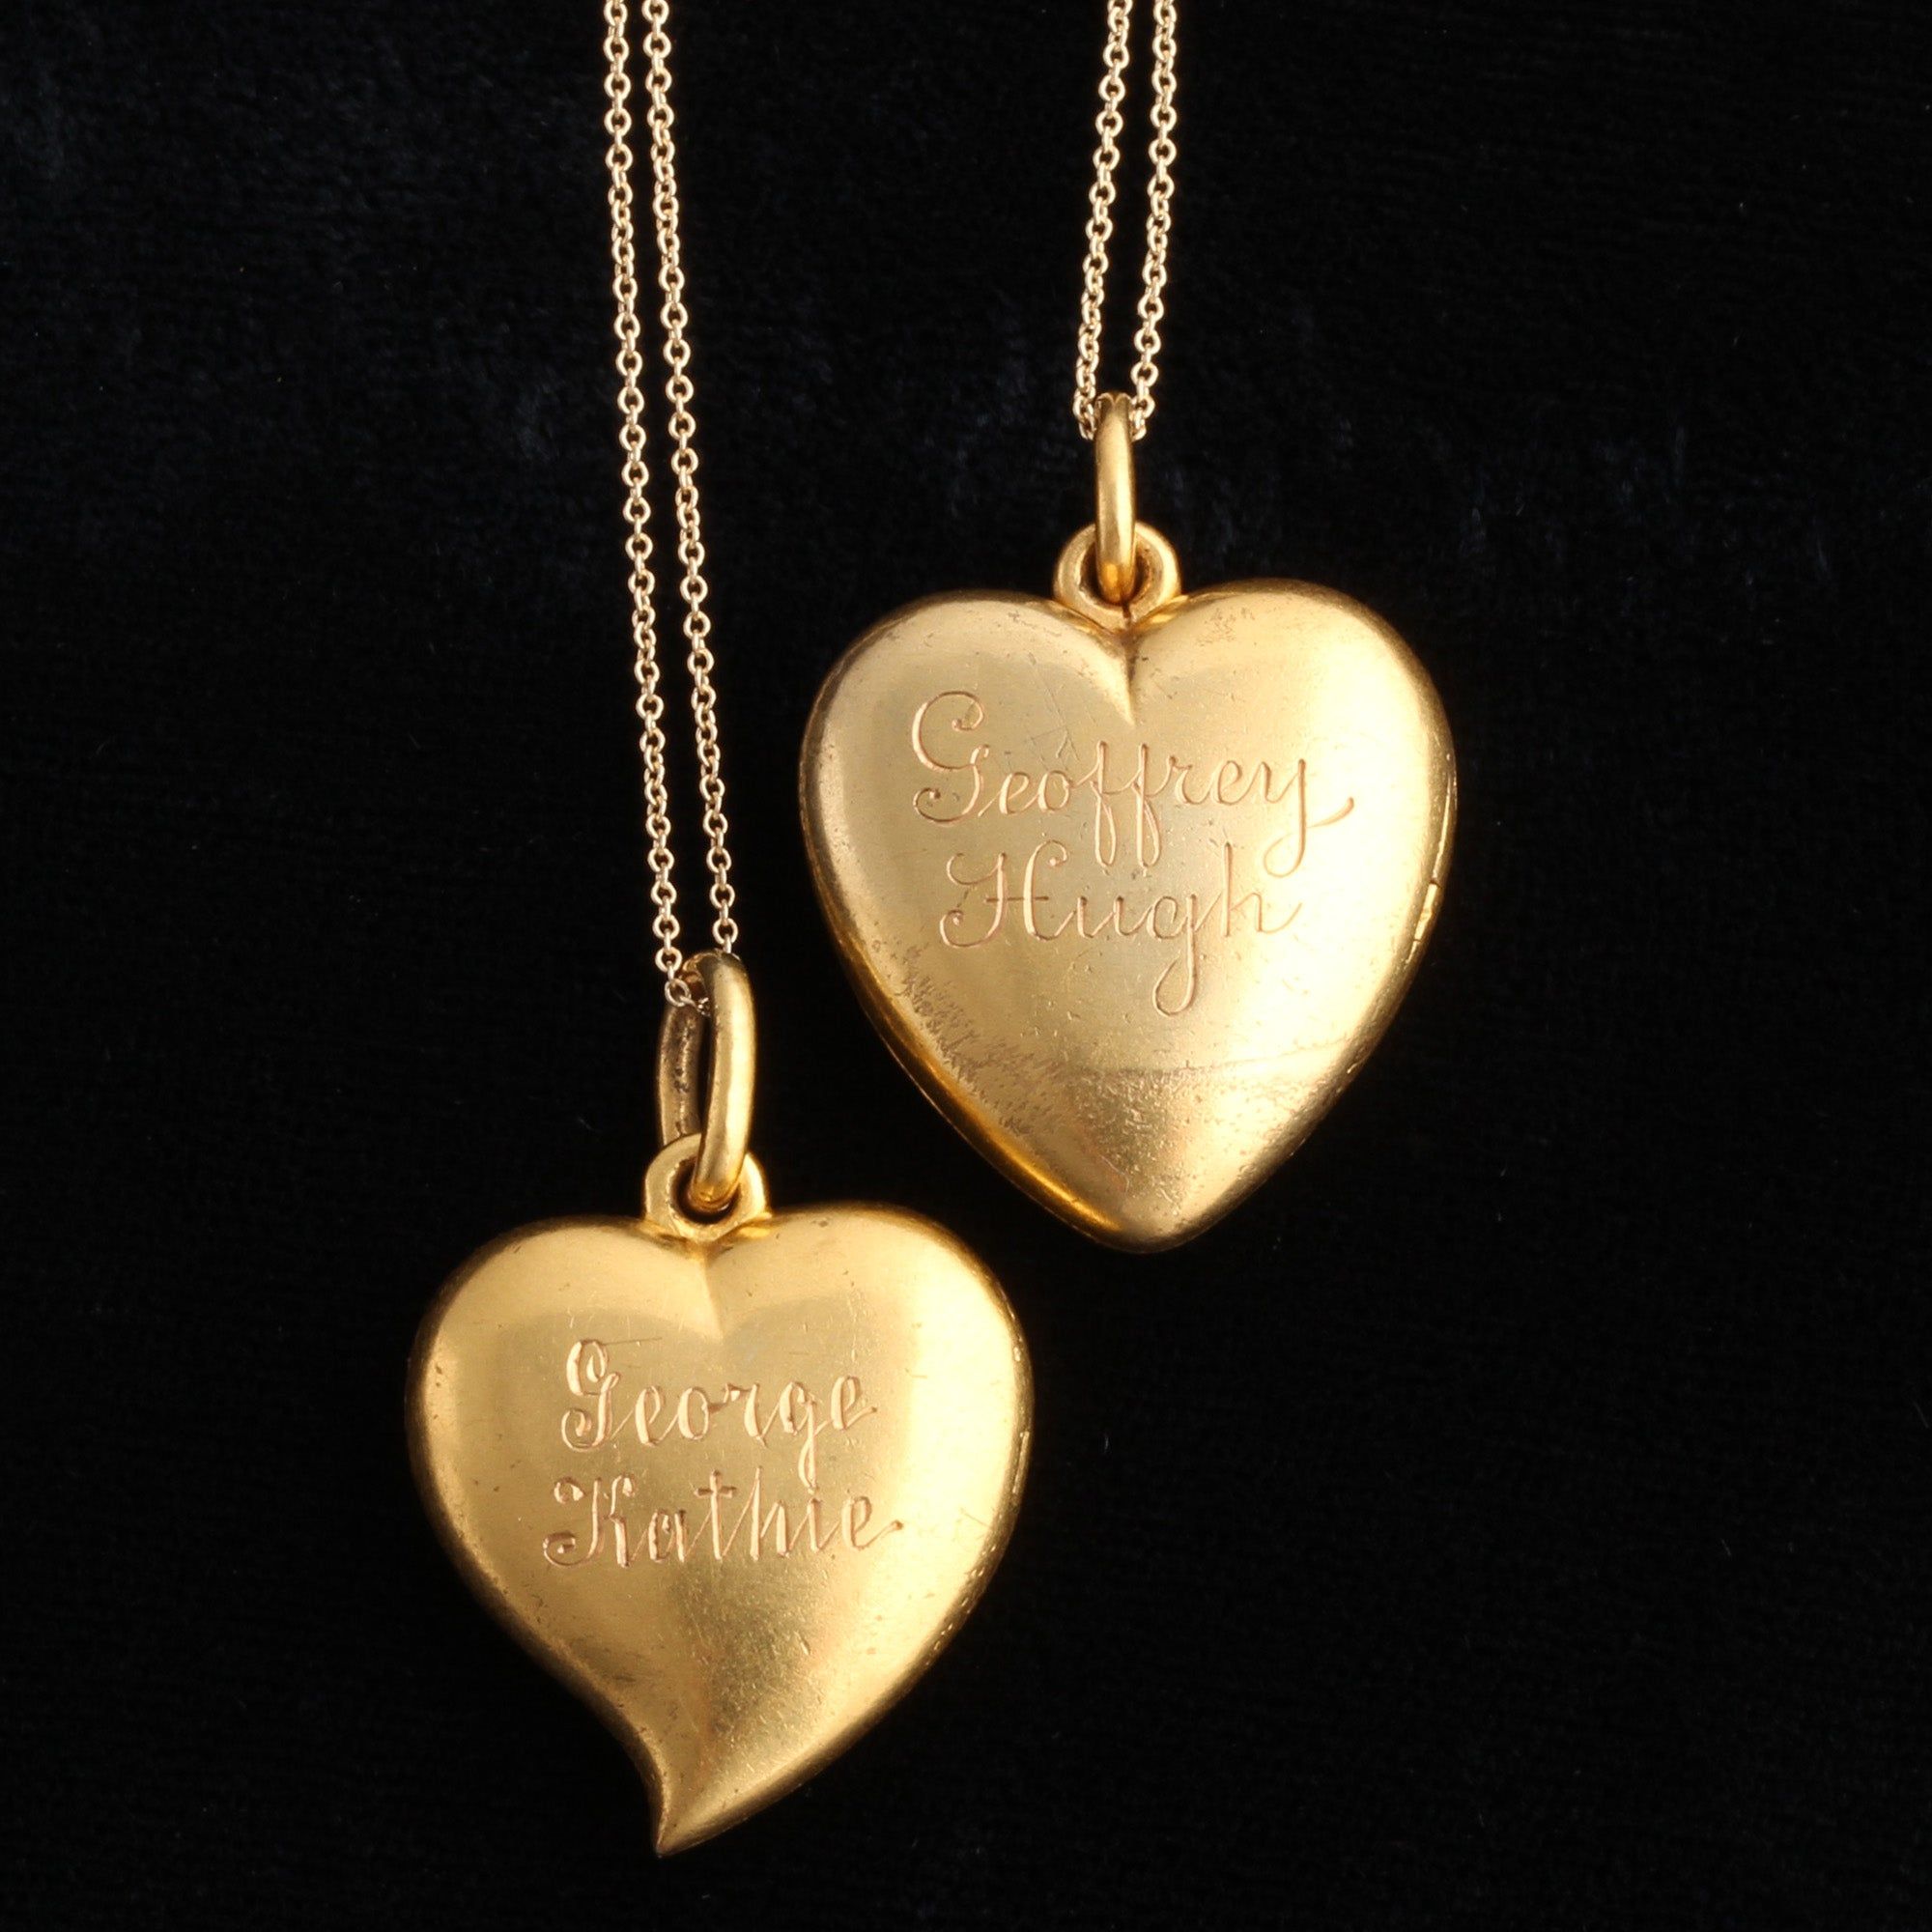 Detail of Late 19th Century "George Kathie" Witch's Heart Locket